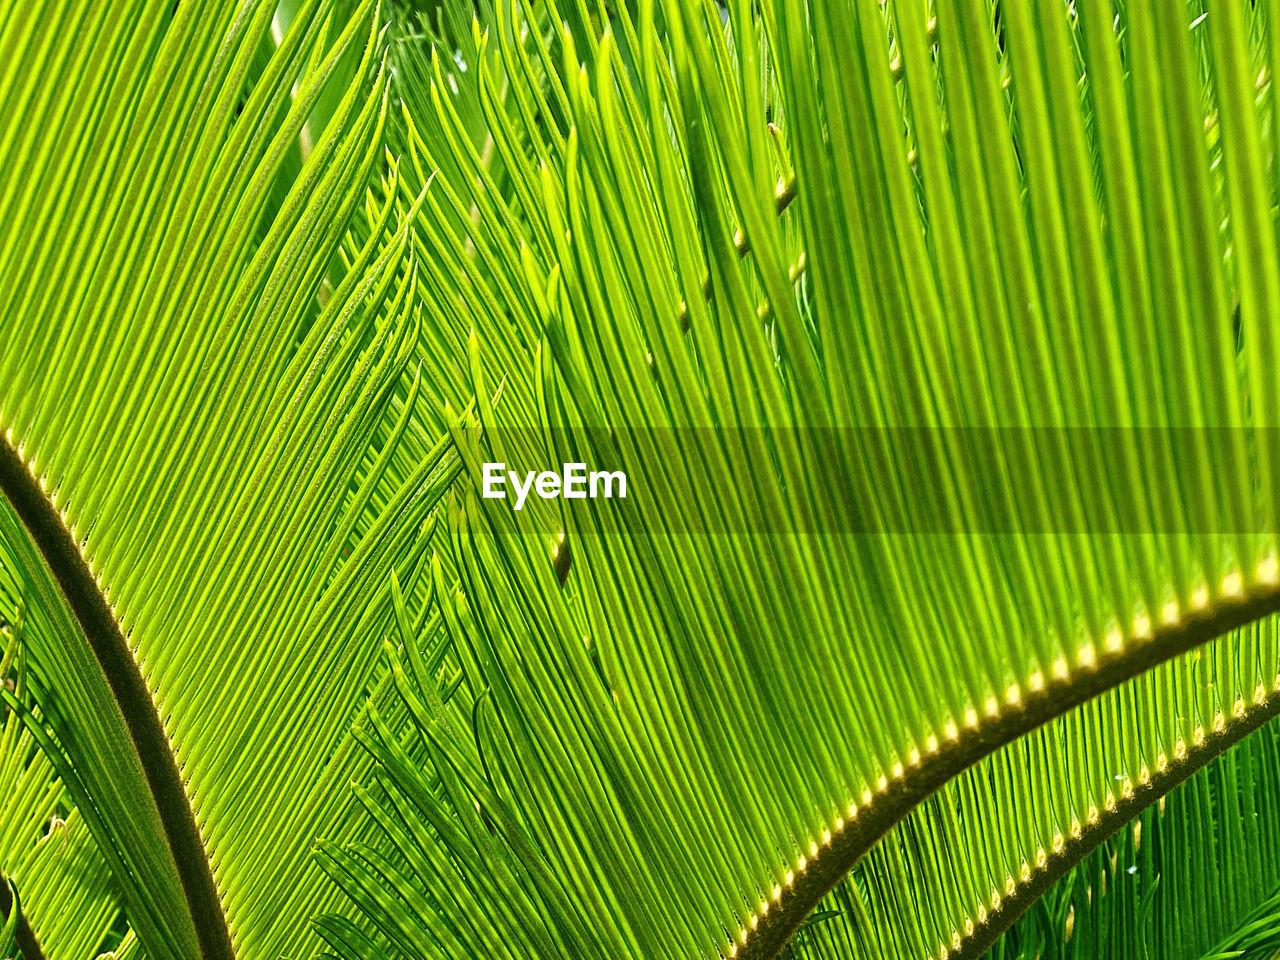 green, leaf, plant part, plant, palm tree, backgrounds, full frame, palm leaf, growth, beauty in nature, nature, no people, close-up, tropical climate, pattern, tree, flower, day, frond, sunlight, outdoors, freshness, textured, banana leaf, botany, grass, foliage, lush foliage, leaves, plant stem, yellow, environment